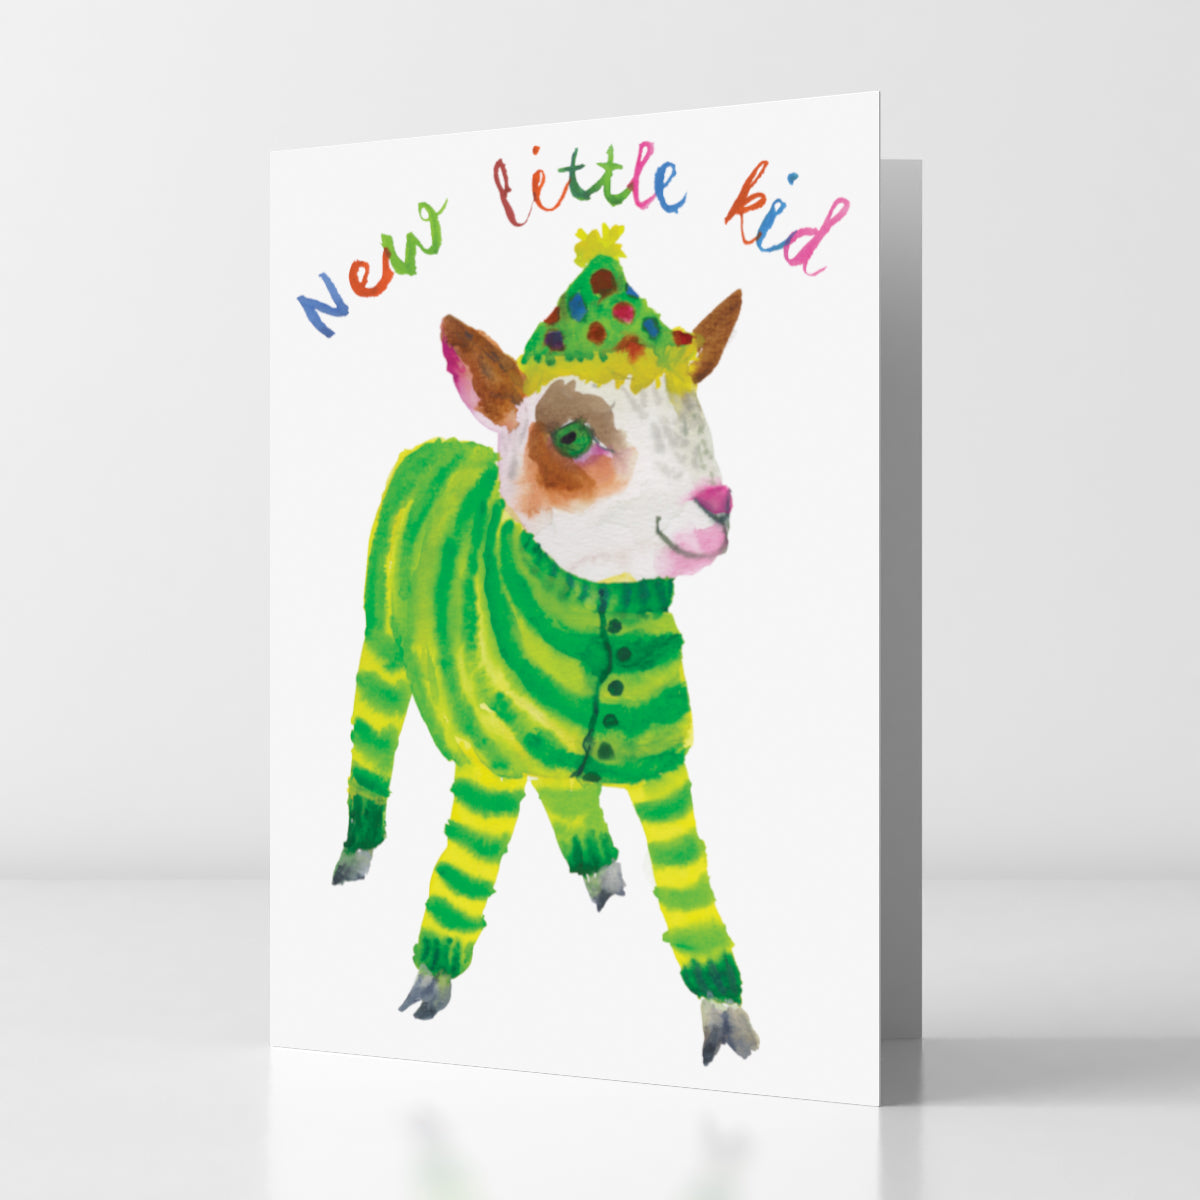 New Little Kid New Baby Card